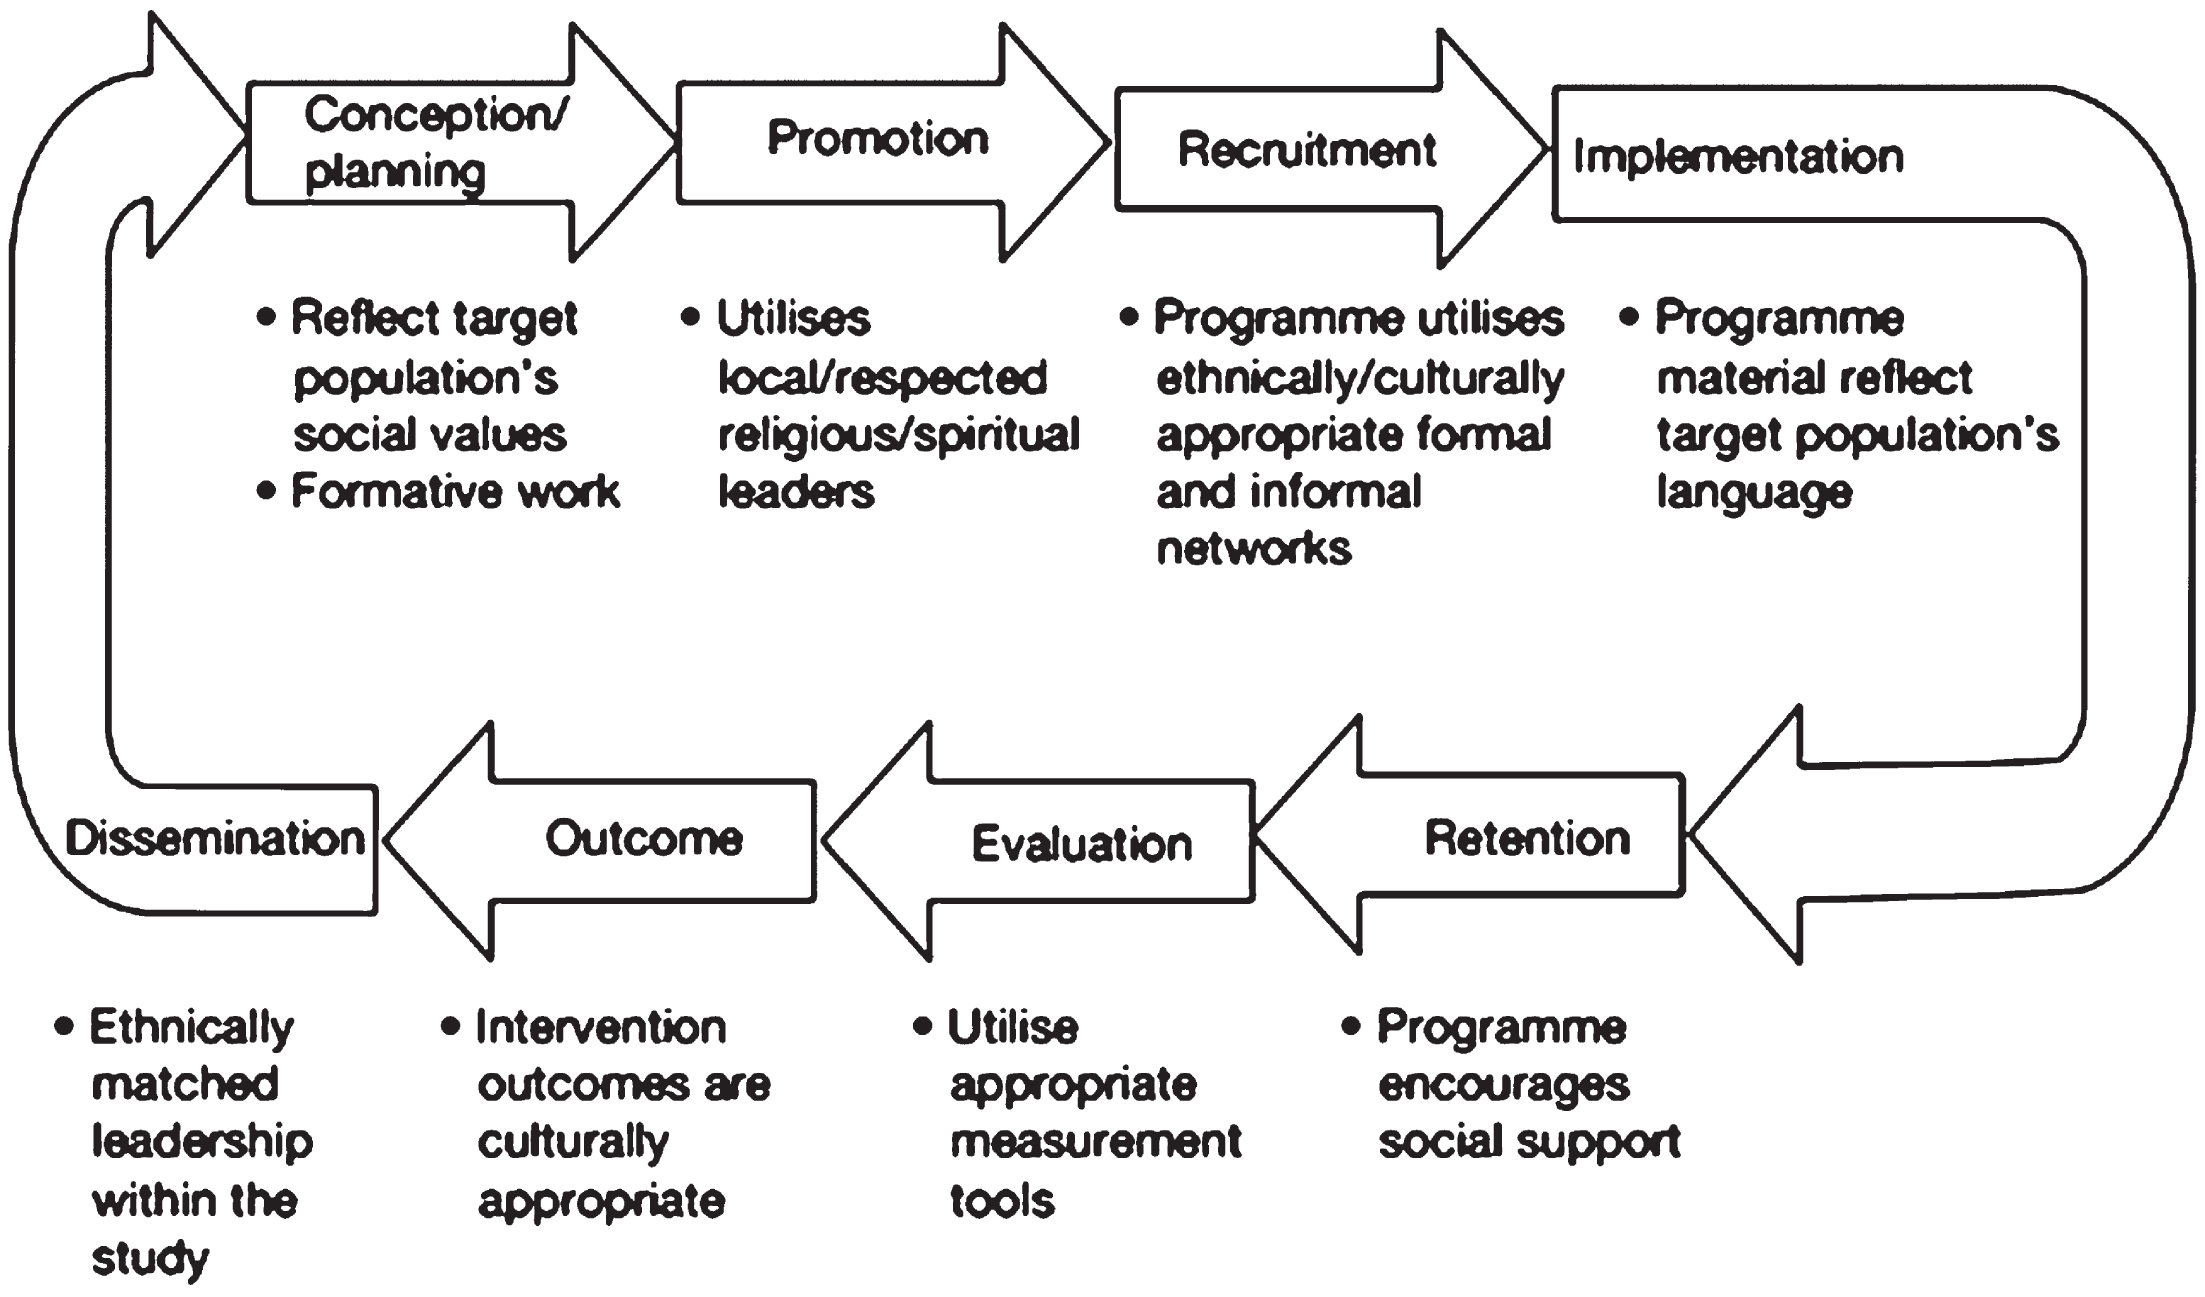 Programme theory of adapted health promotion interventions with examples of adaptations at each stage, reproduced from Liu et al. [12].